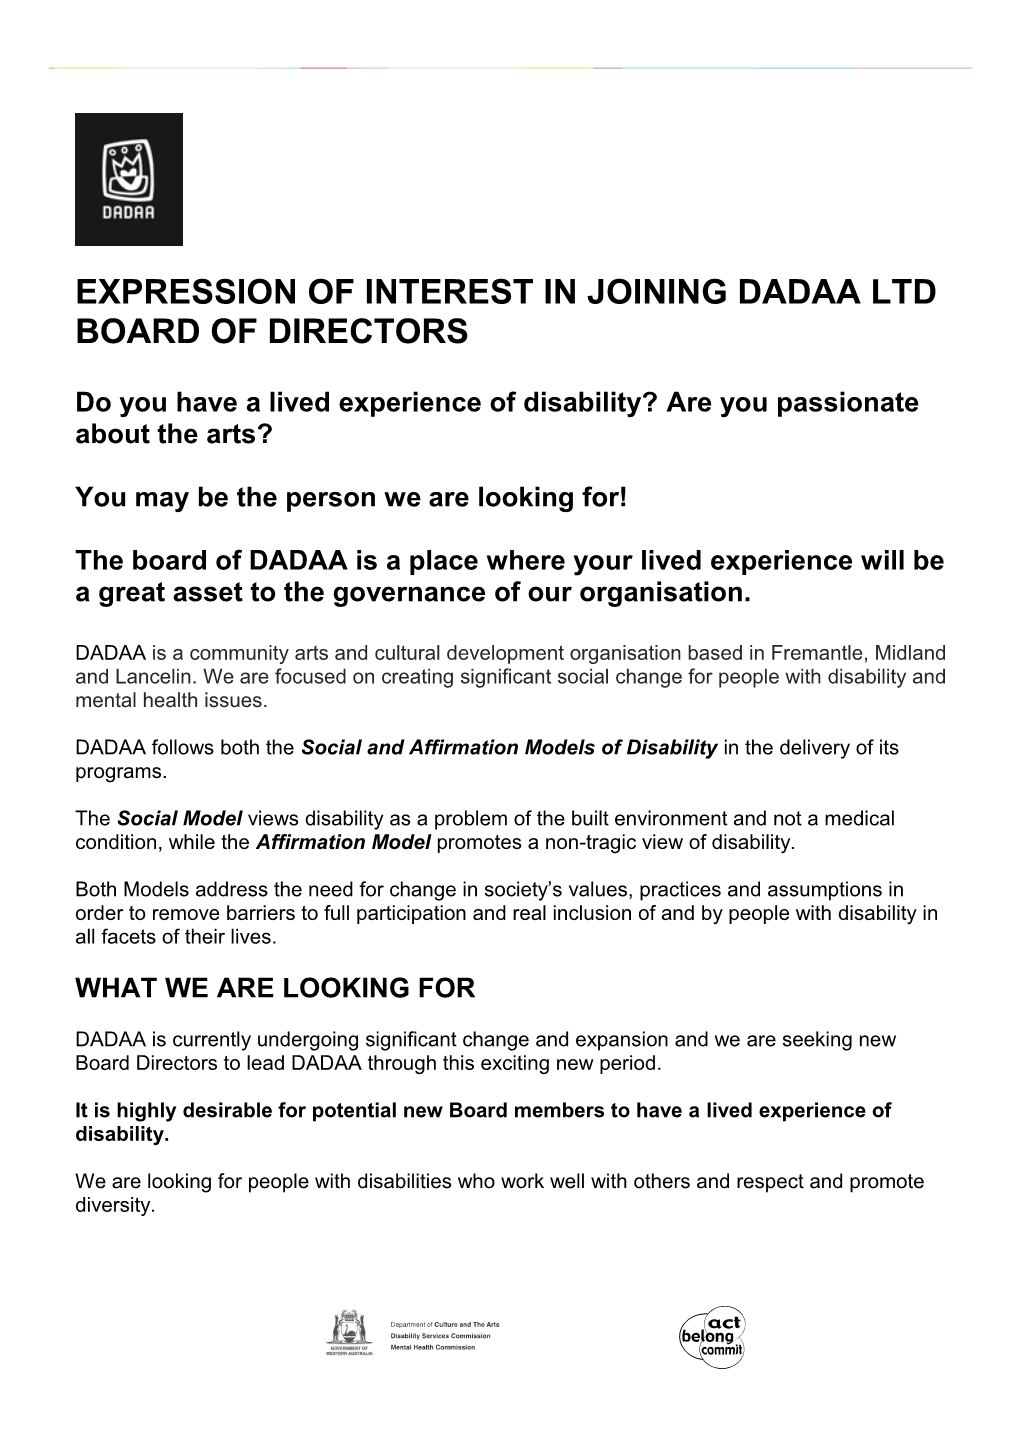 Do You Have a Lived Experience of Disability?Are You Passionate About the Arts?